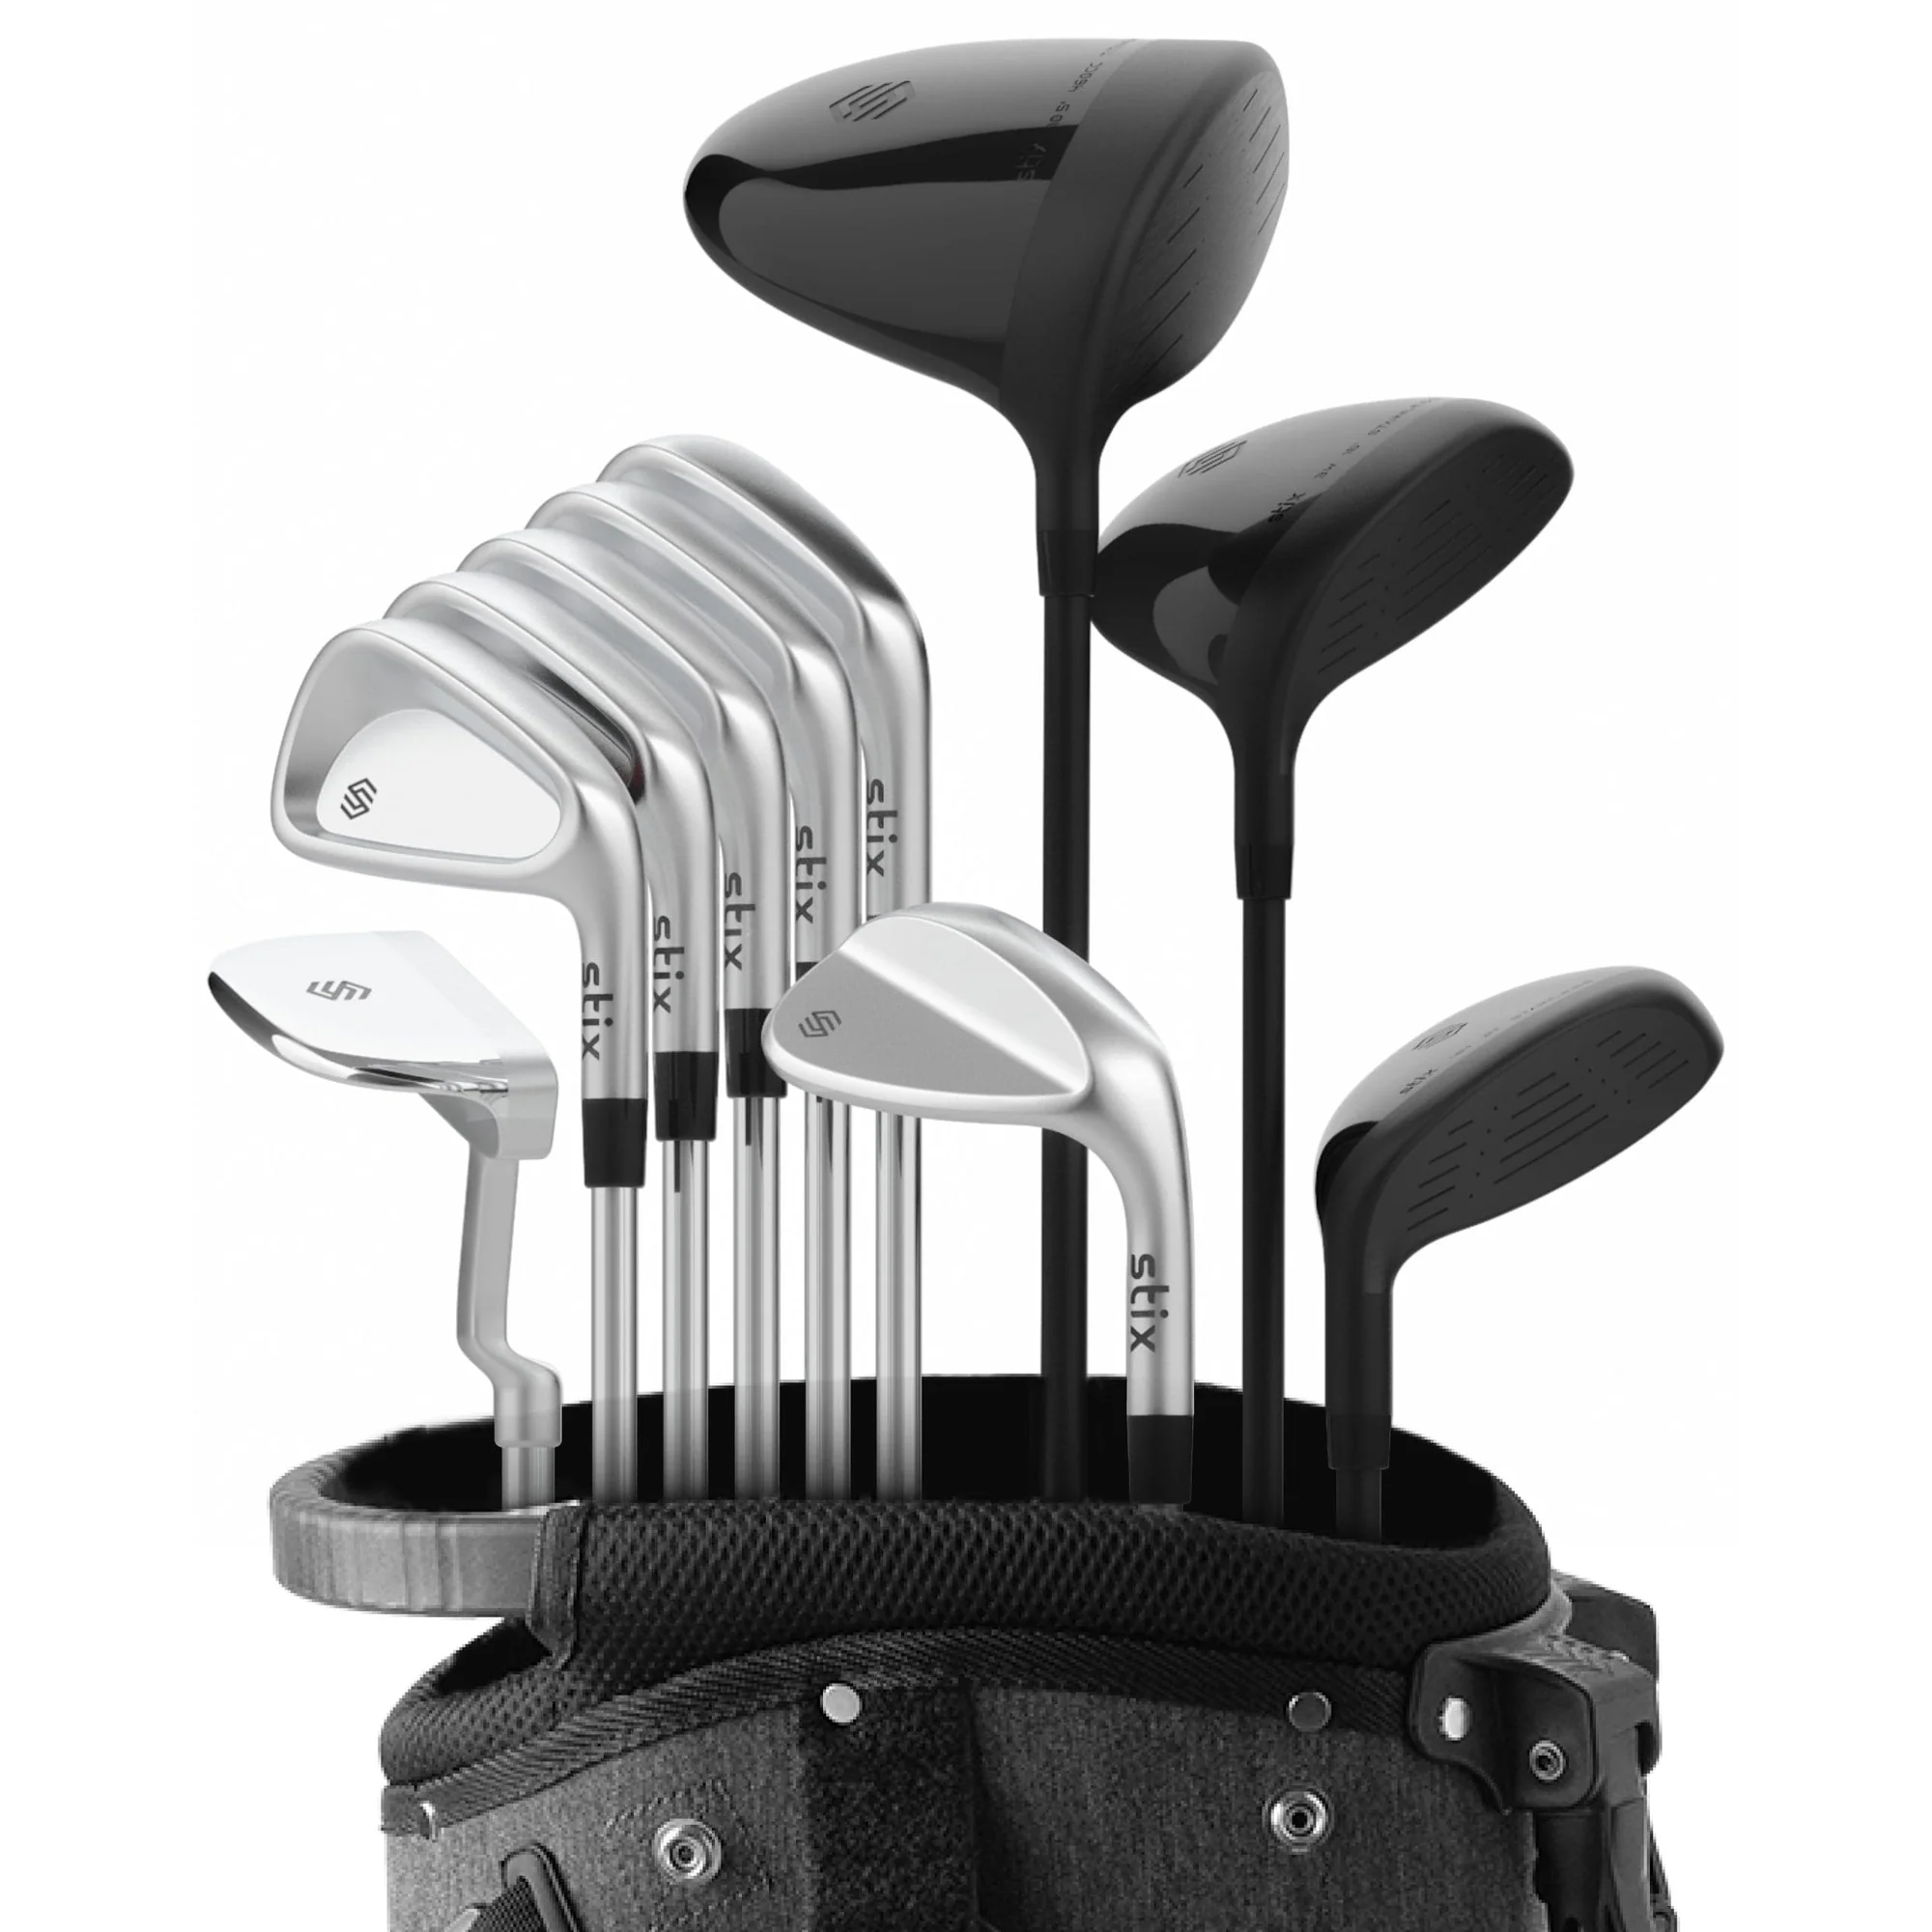 Stix Play Golf Clubs – Use Code “BE50” to save $50